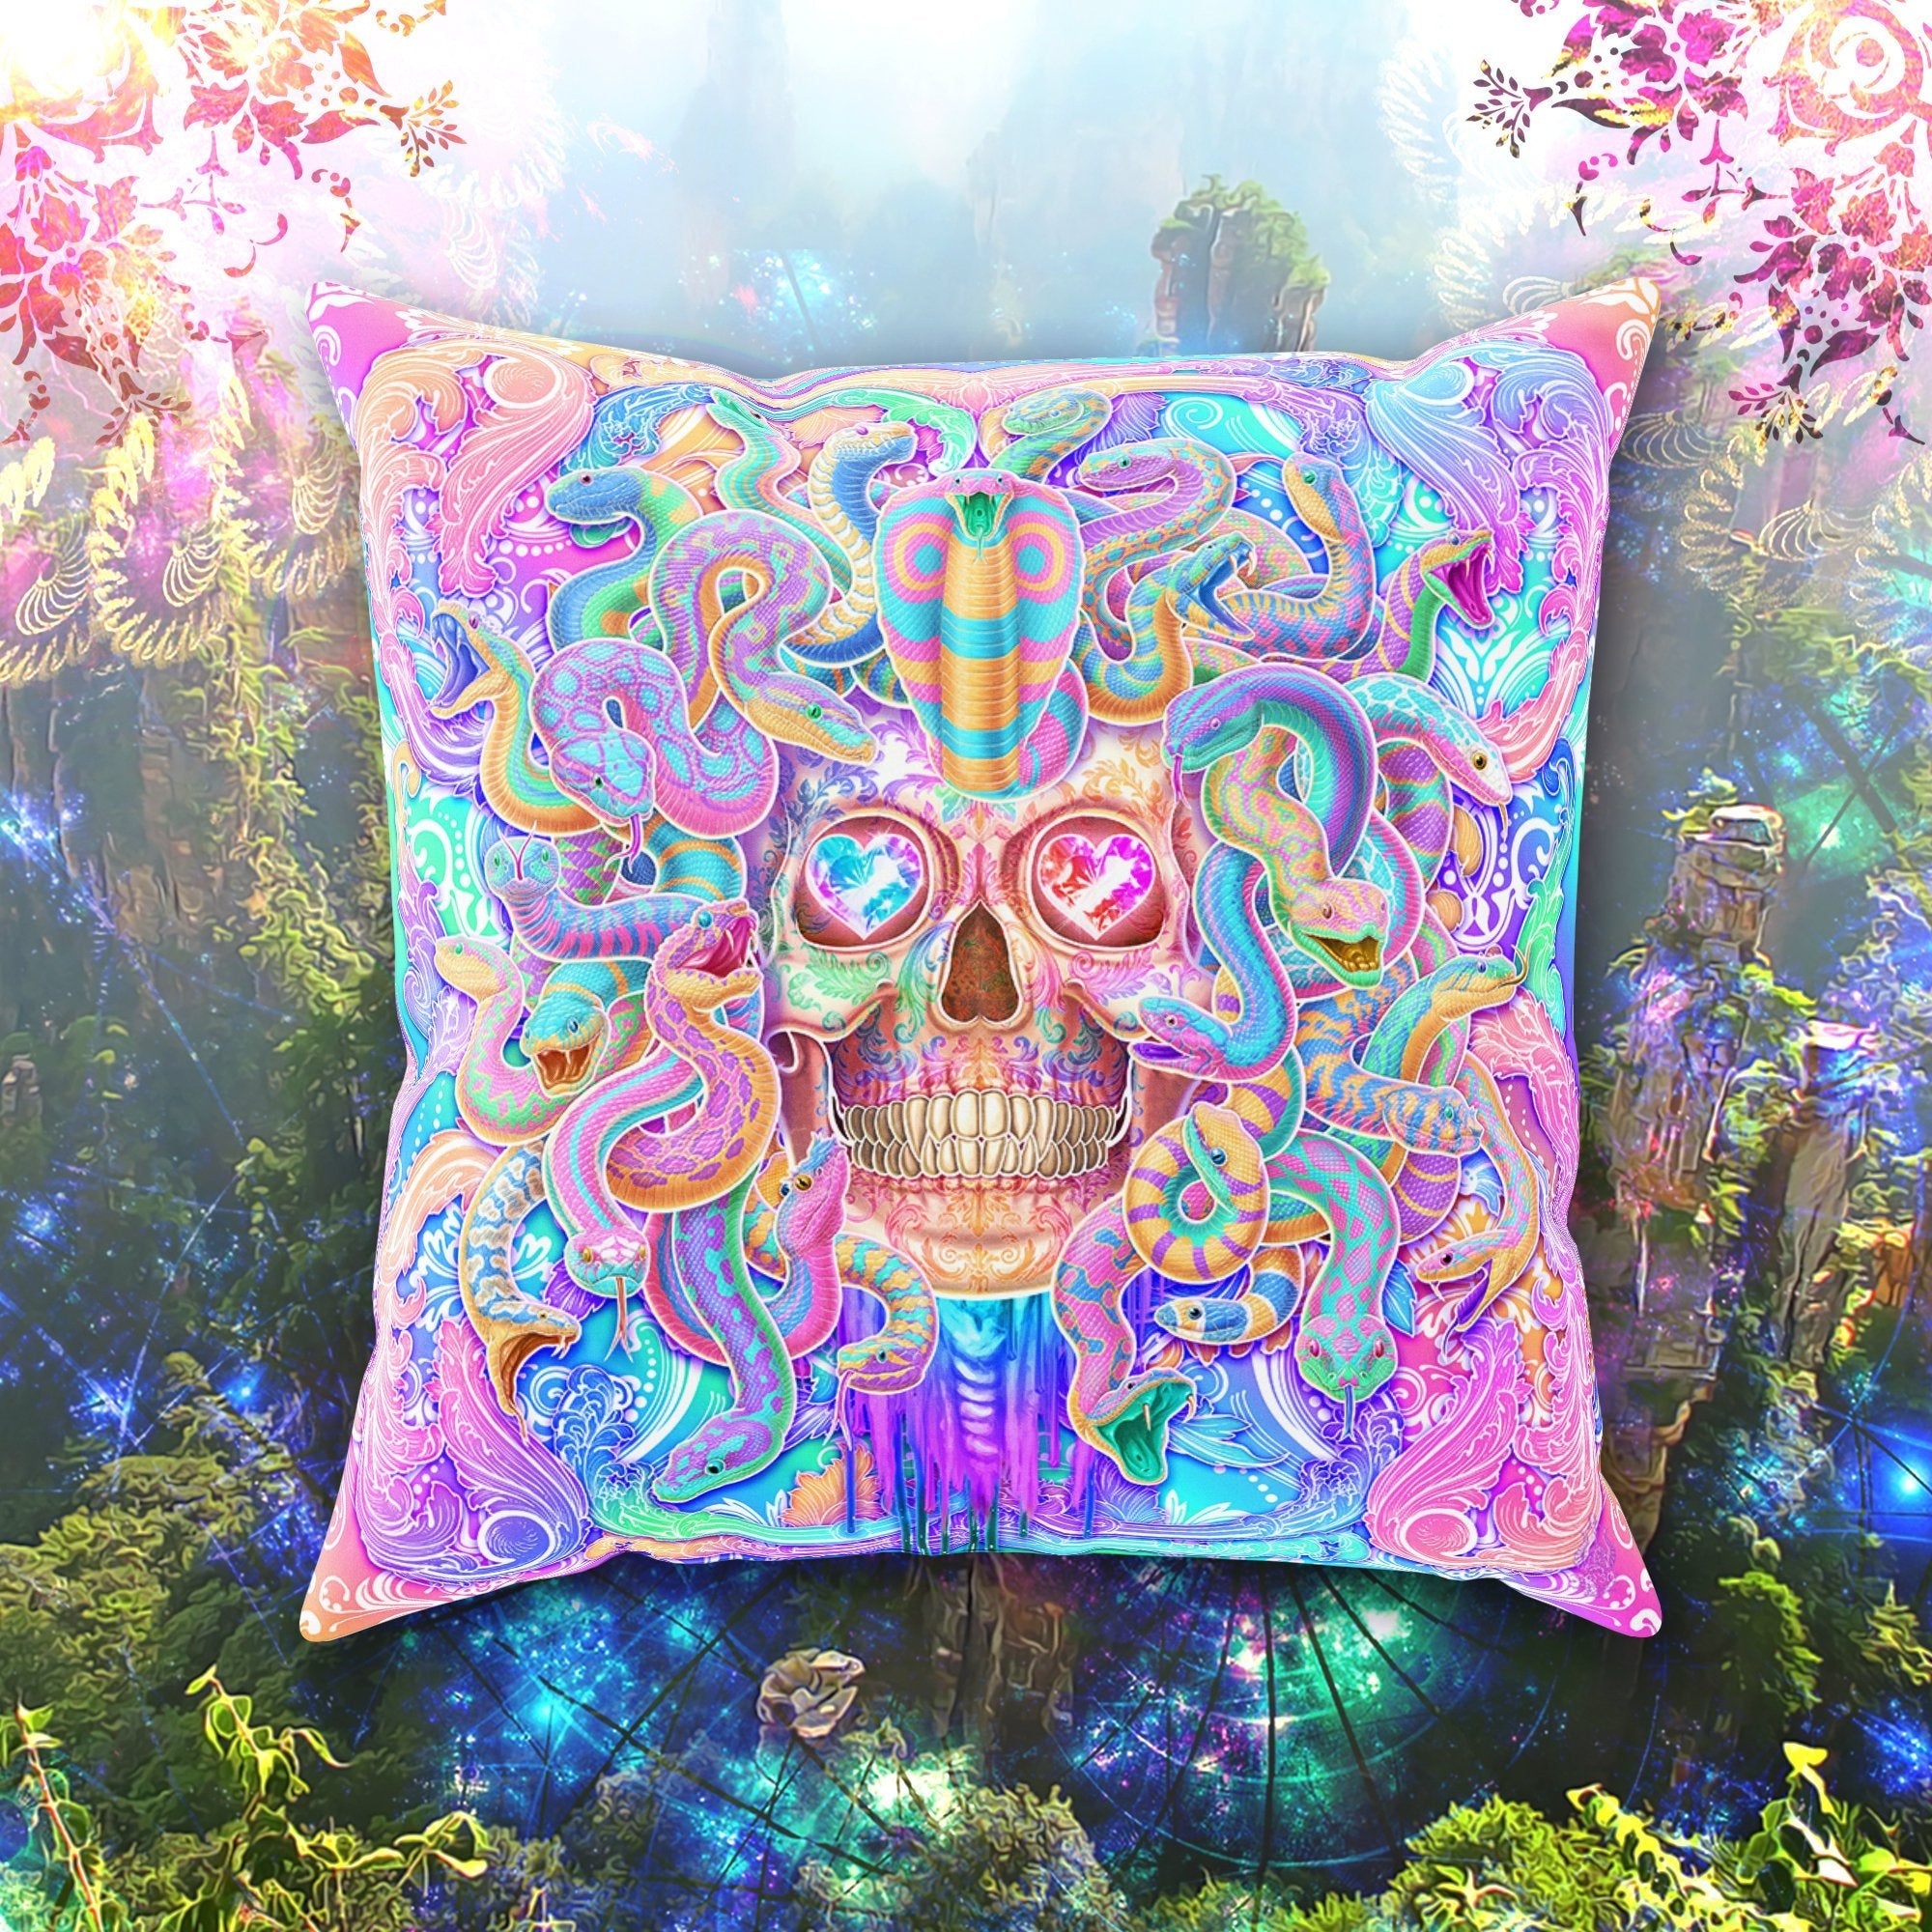 https://cdn.shopify.com/s/files/1/0584/5608/0574/products/pastel-skull-throw-pillow-decorative-accent-cushion-aesthetic-room-decor-psychedelic-art-funky-and-eclectic-home-medusa-snakes-abysm-internal-637656.jpg?v=1686693883&width=4000